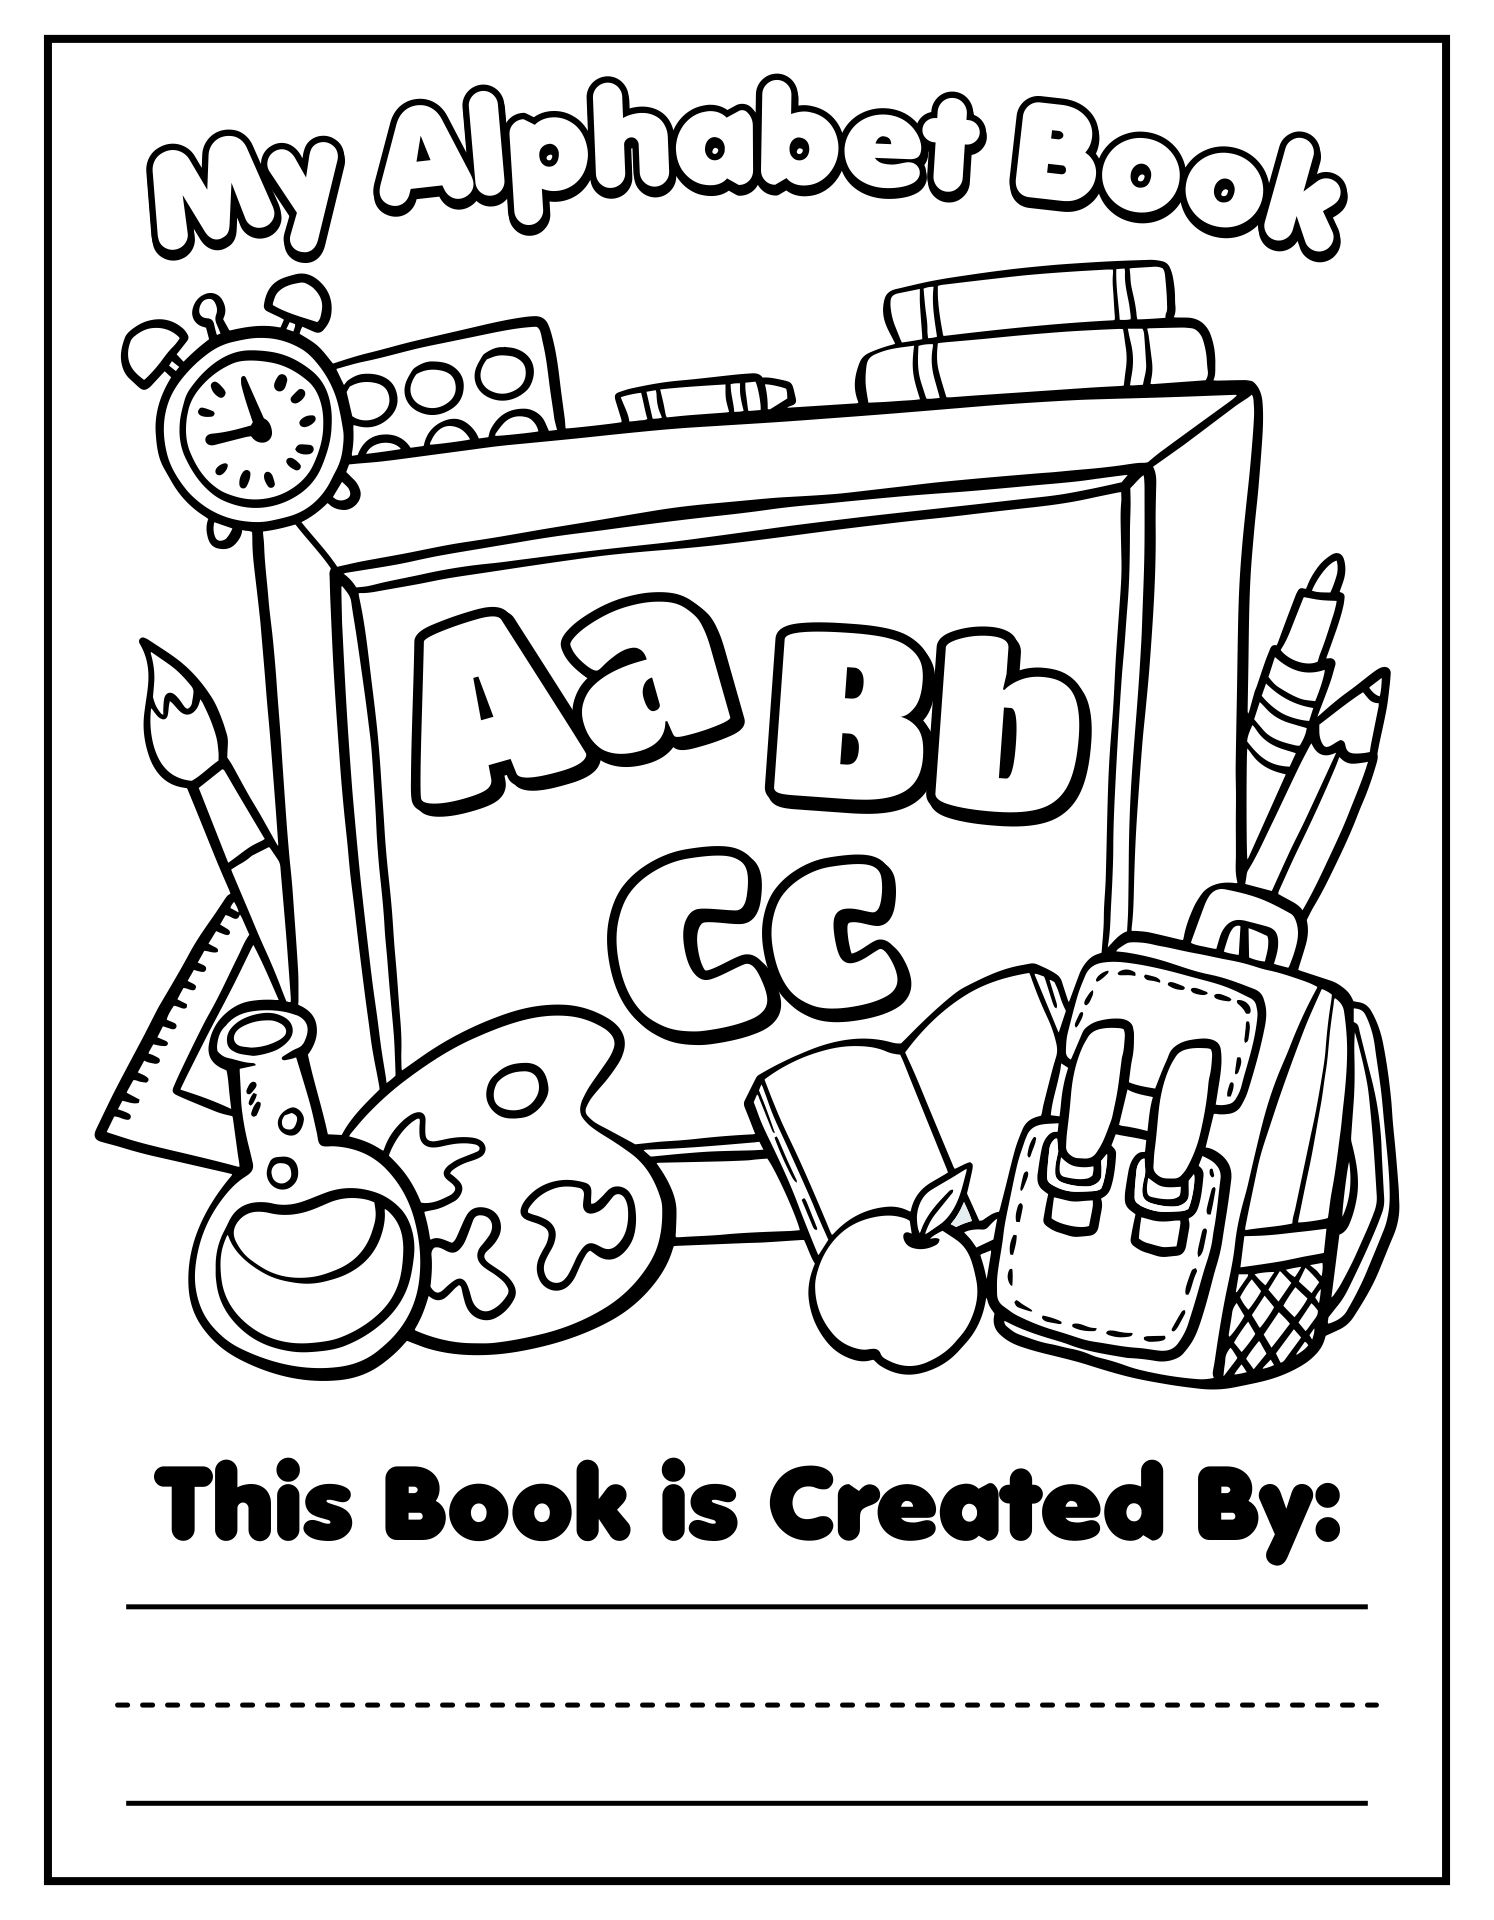 10-best-printable-alphabet-book-cover-pdf-for-free-at-printablee